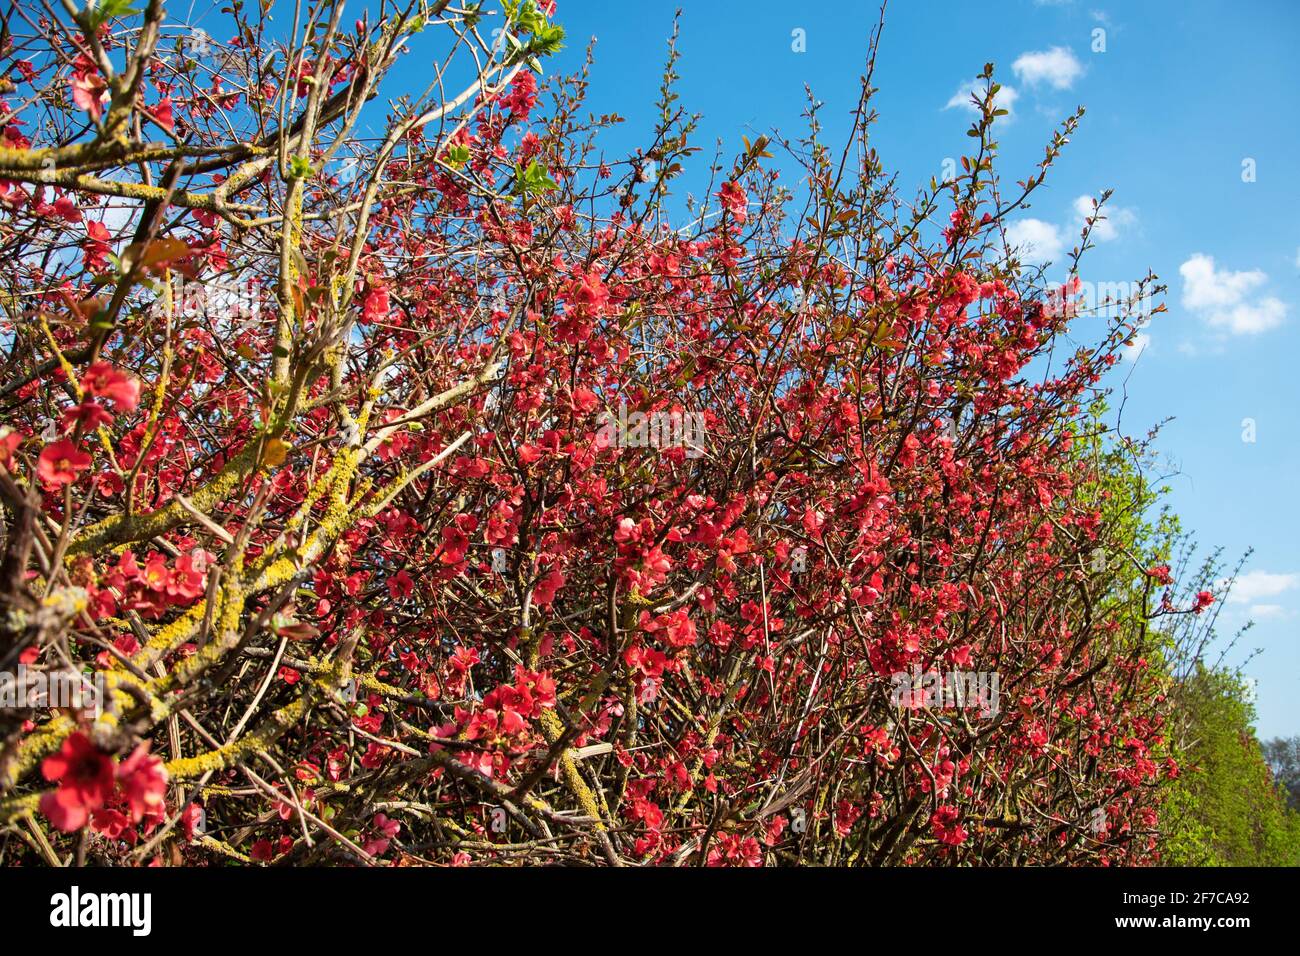 Japanese quince (Chaenomeles) bush blossoming with red flowers. Spring rural landscape in Ile-de-France, France. Stock Photo